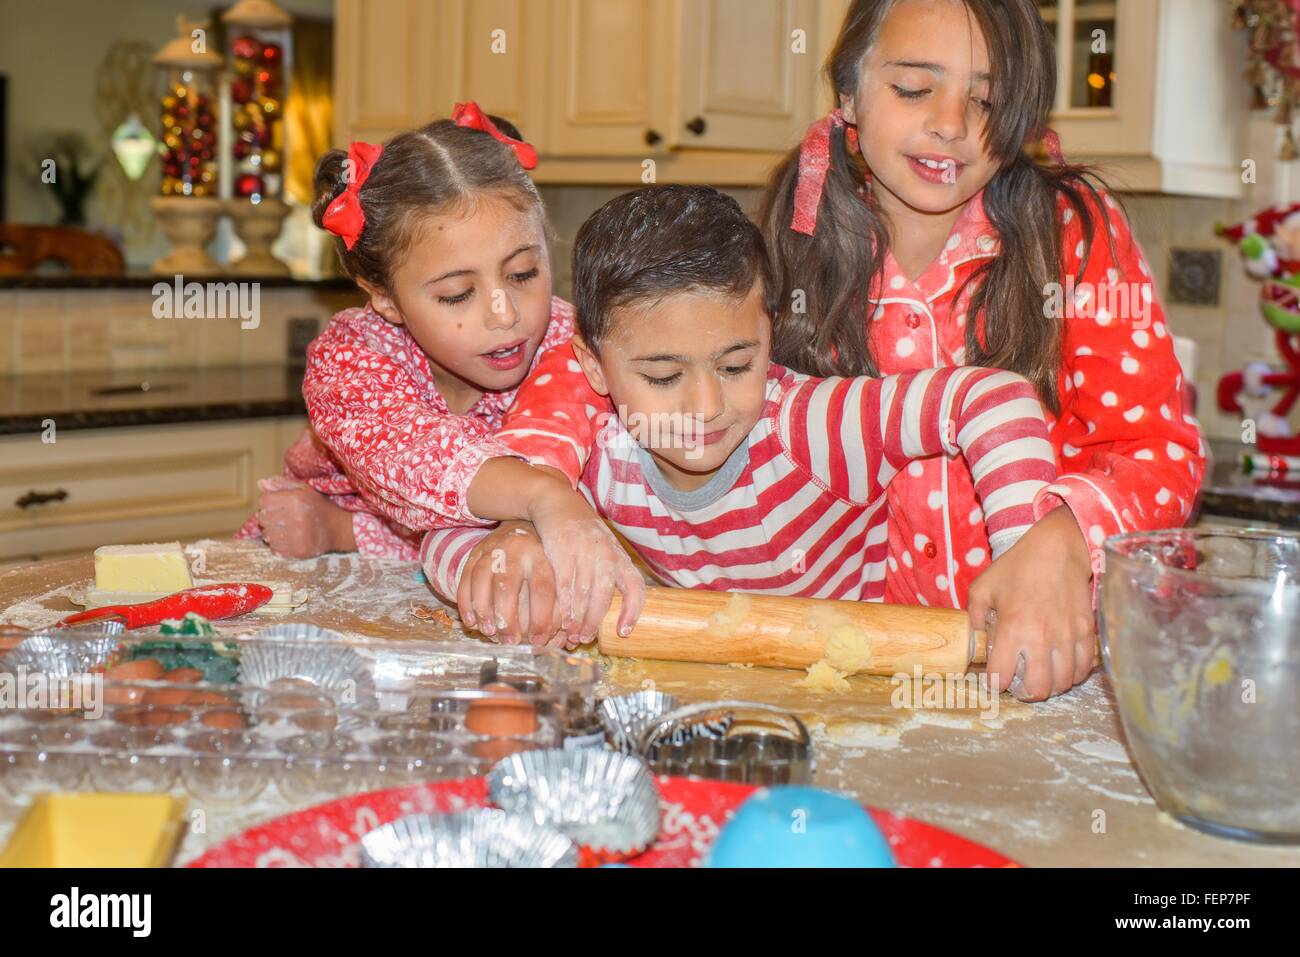 Children in kitchen wearing pyjamas rolling out dough with rolling pin Stock Photo